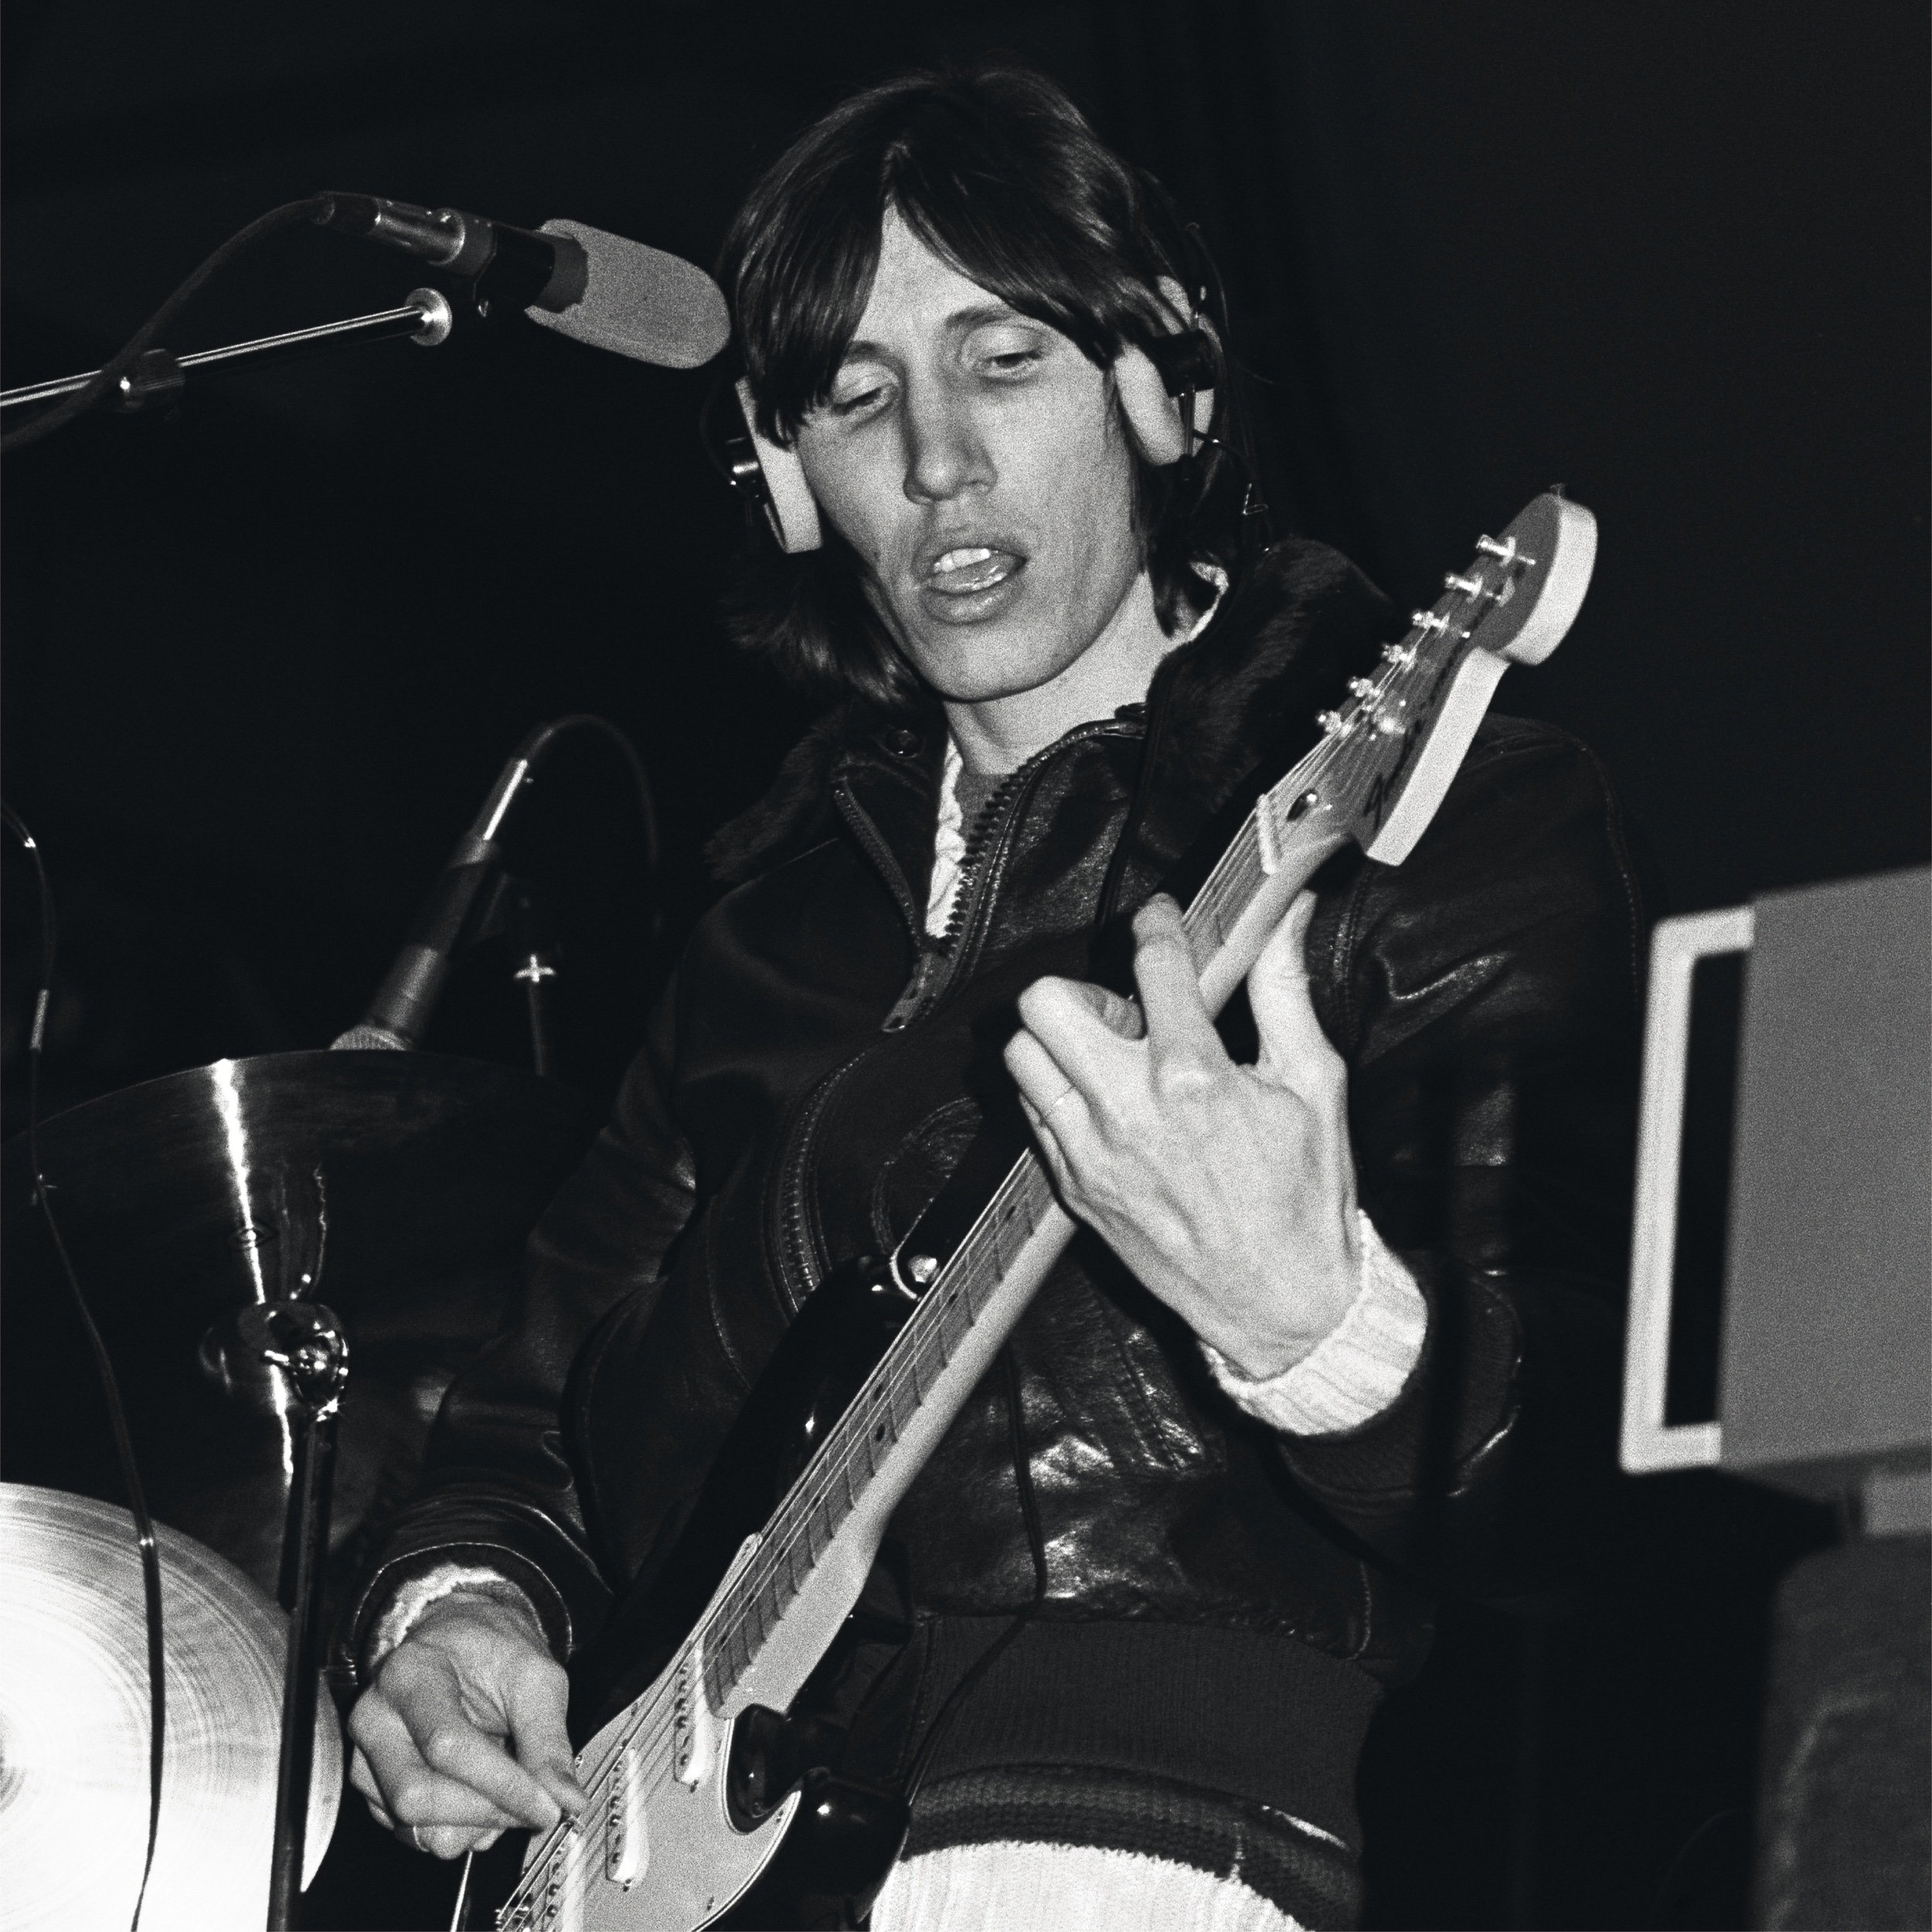 roger waters - tour rehearsals at olympia london 1977 by aubrey powell (c) pink floyd music ltd.jpeg